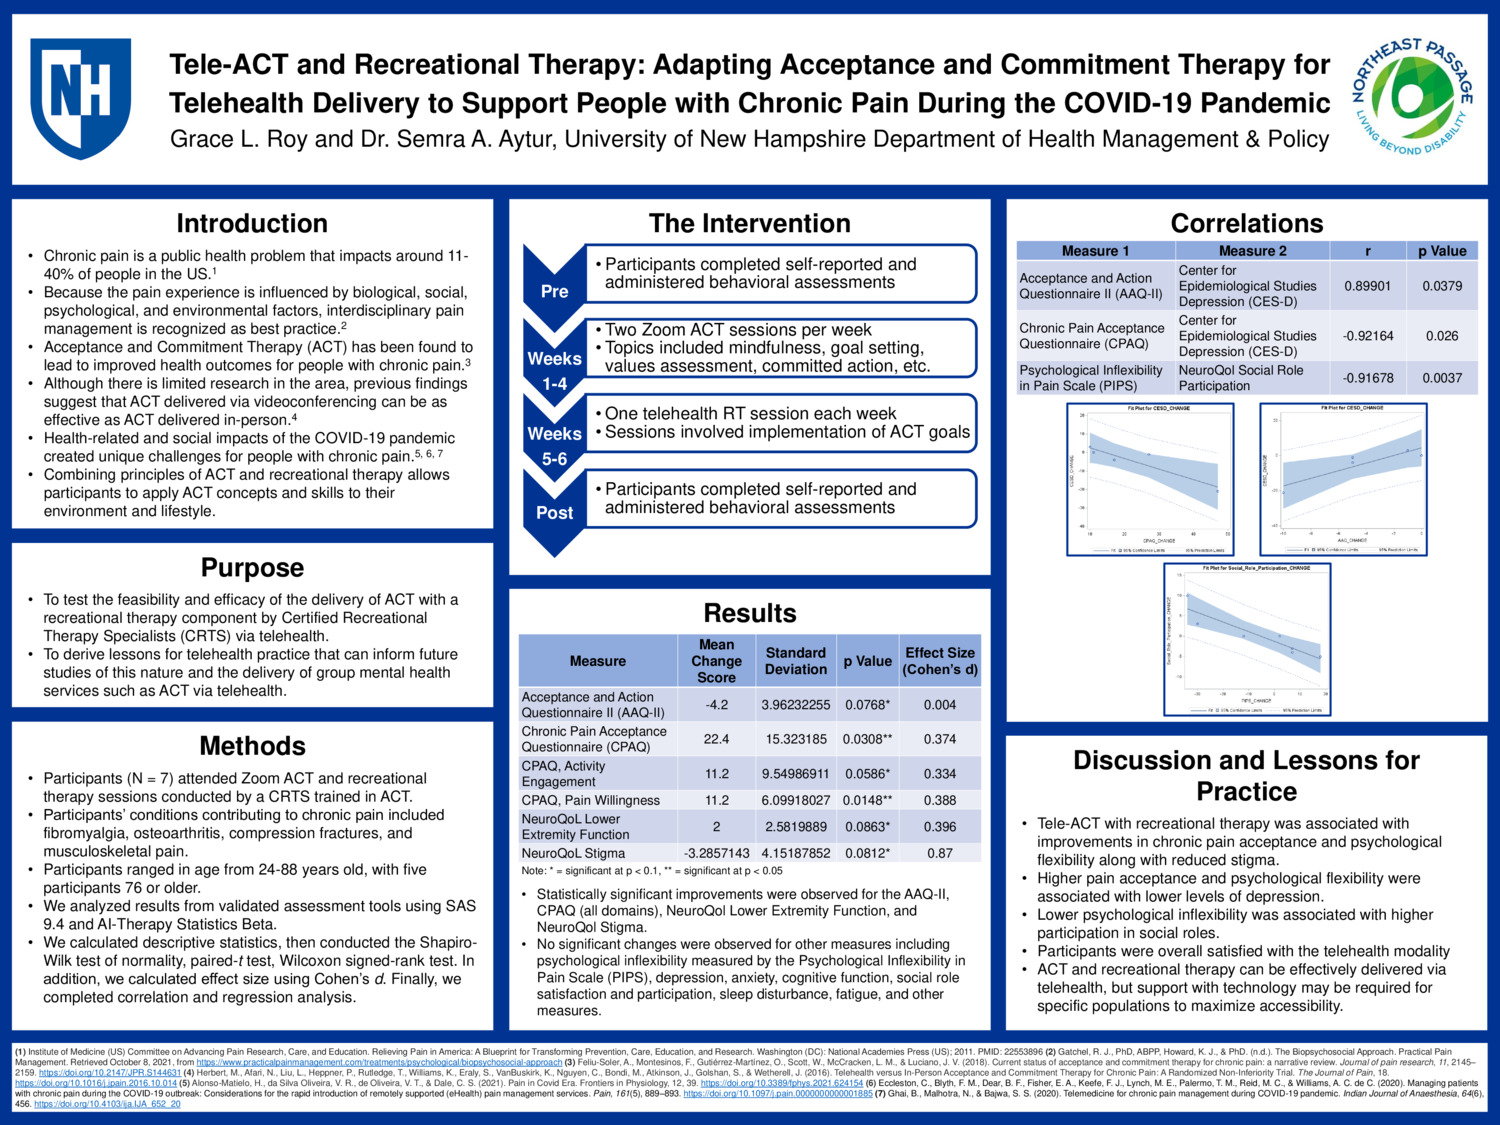 Tele-Act And Recreational Therapy: Adapting Acceptance And Commitment Therapy For  Telehealth Delivery To Support People With Chronic Pain During The Covid-19 Pandemic by glr1008